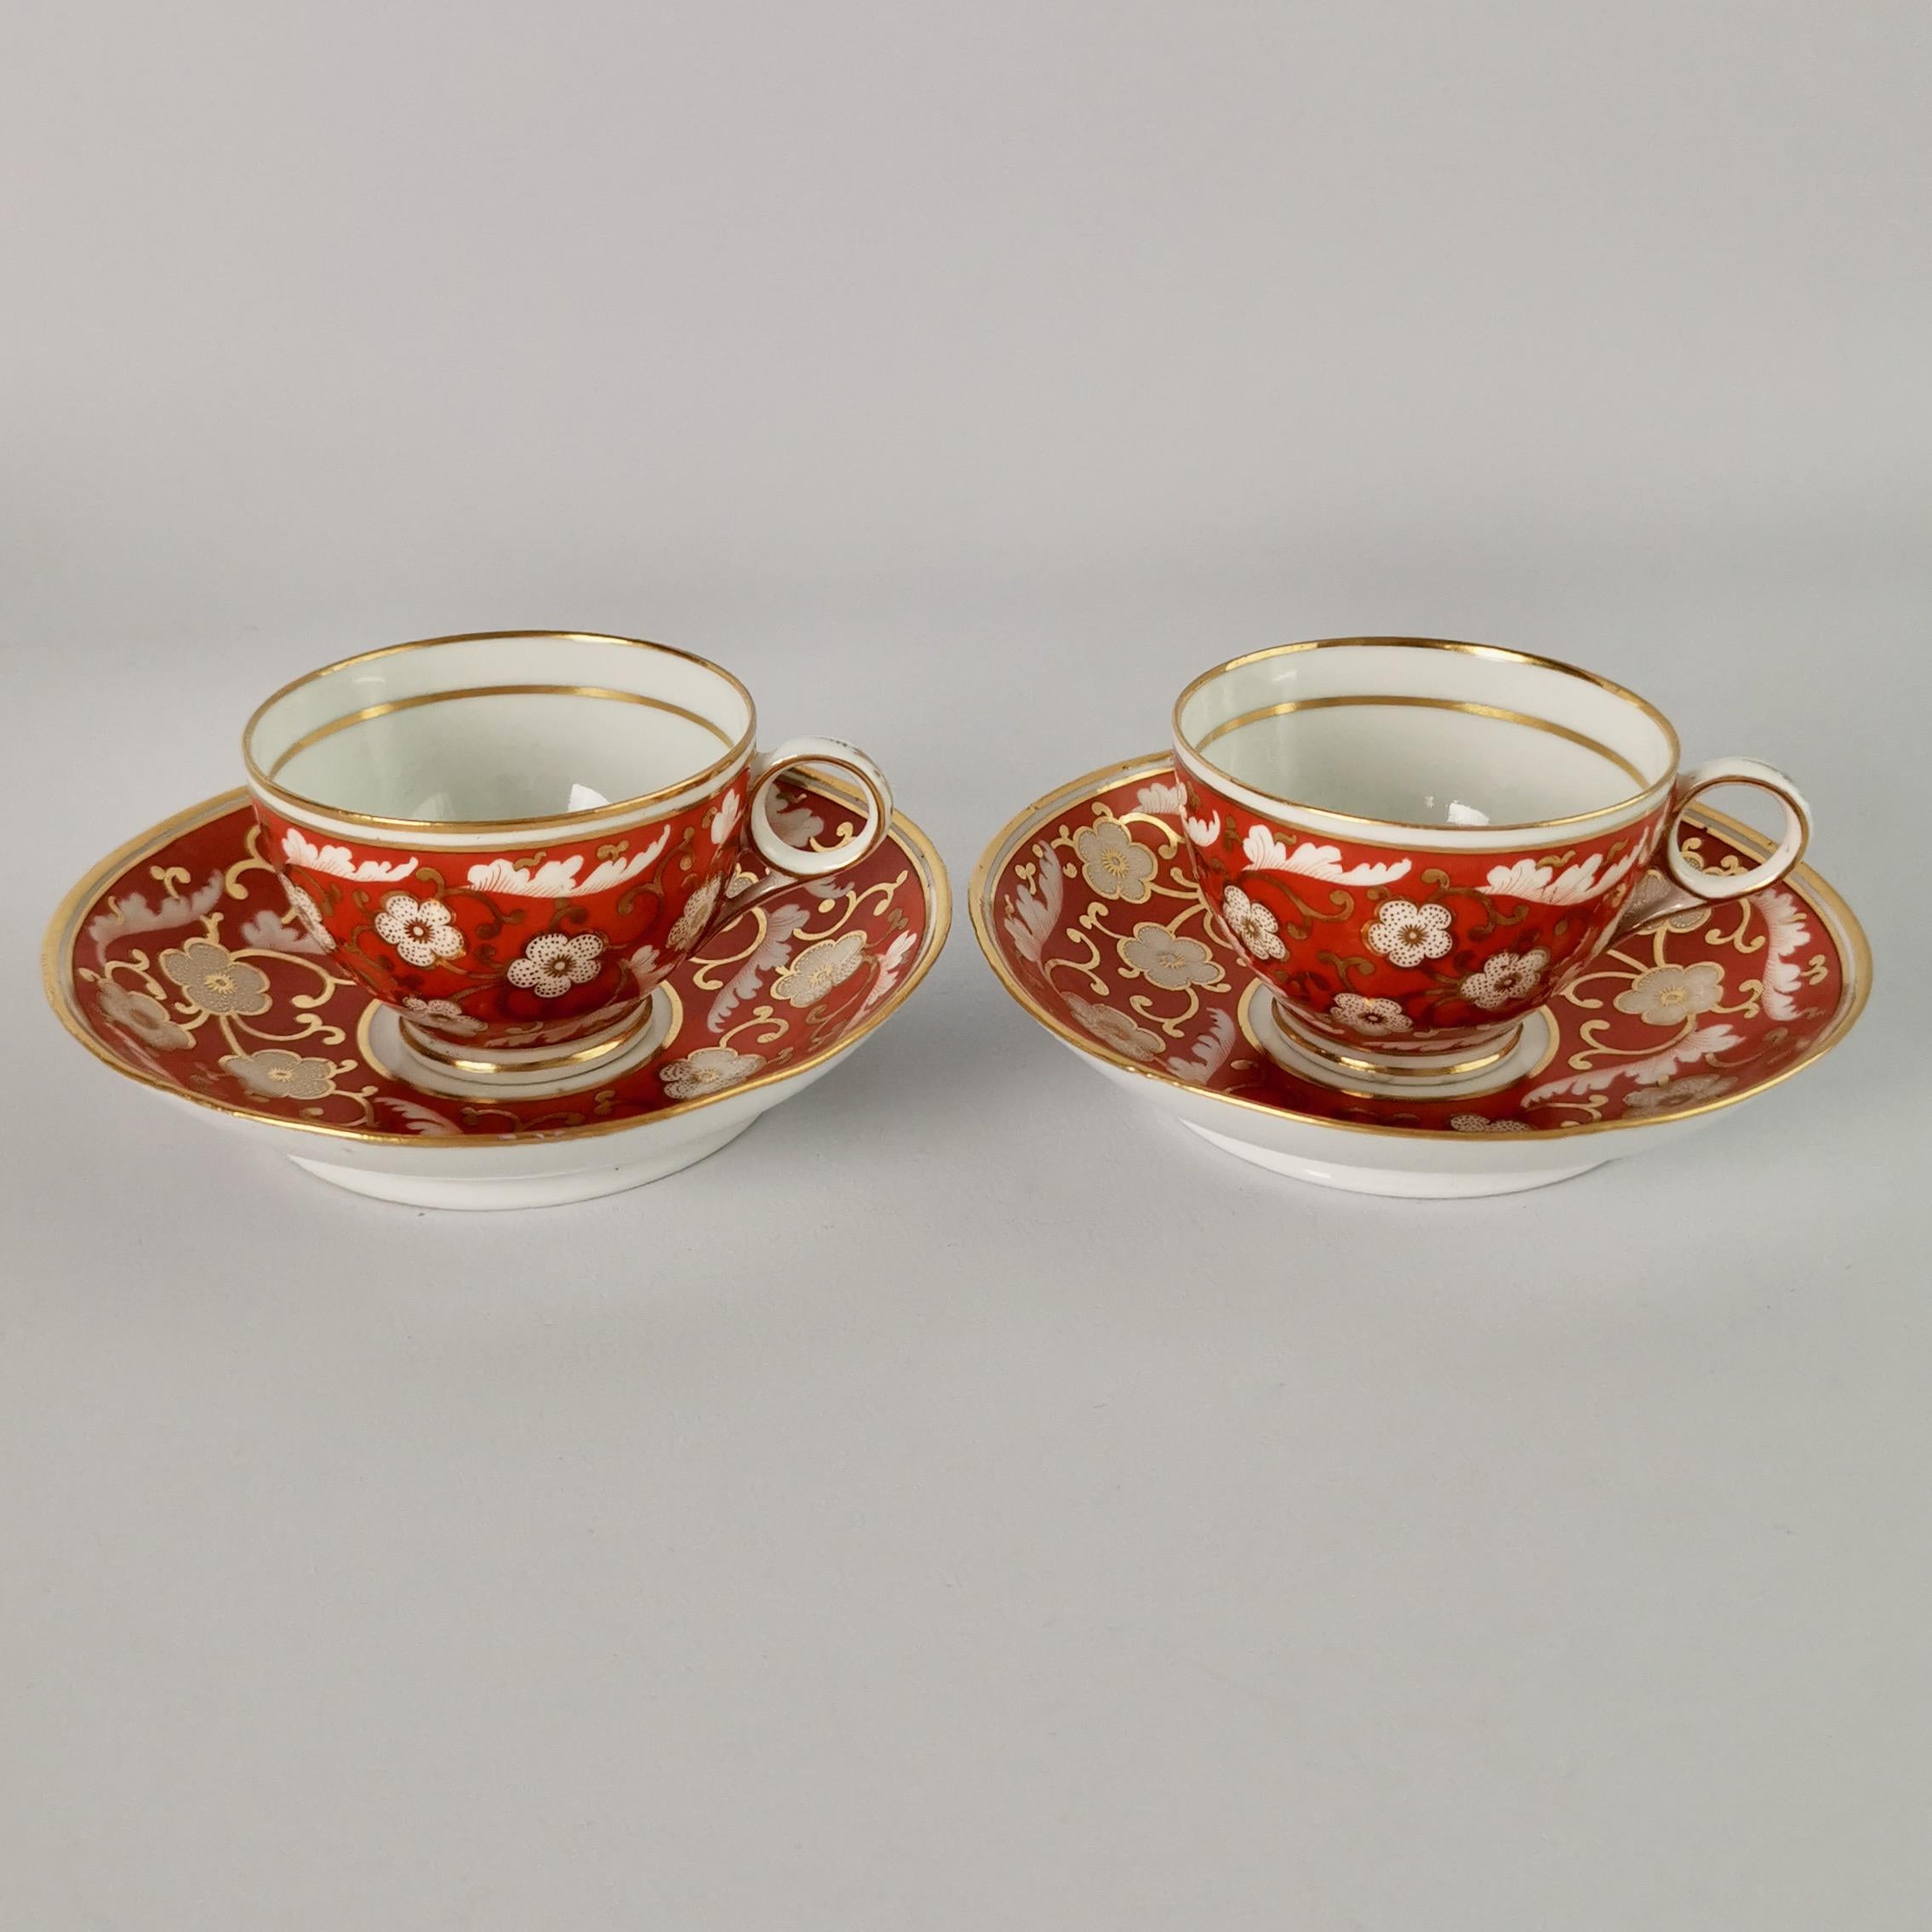 George III Chamberlains Worcester Tiny Tea Service for Two, Orange Floral, Regency ca 1805